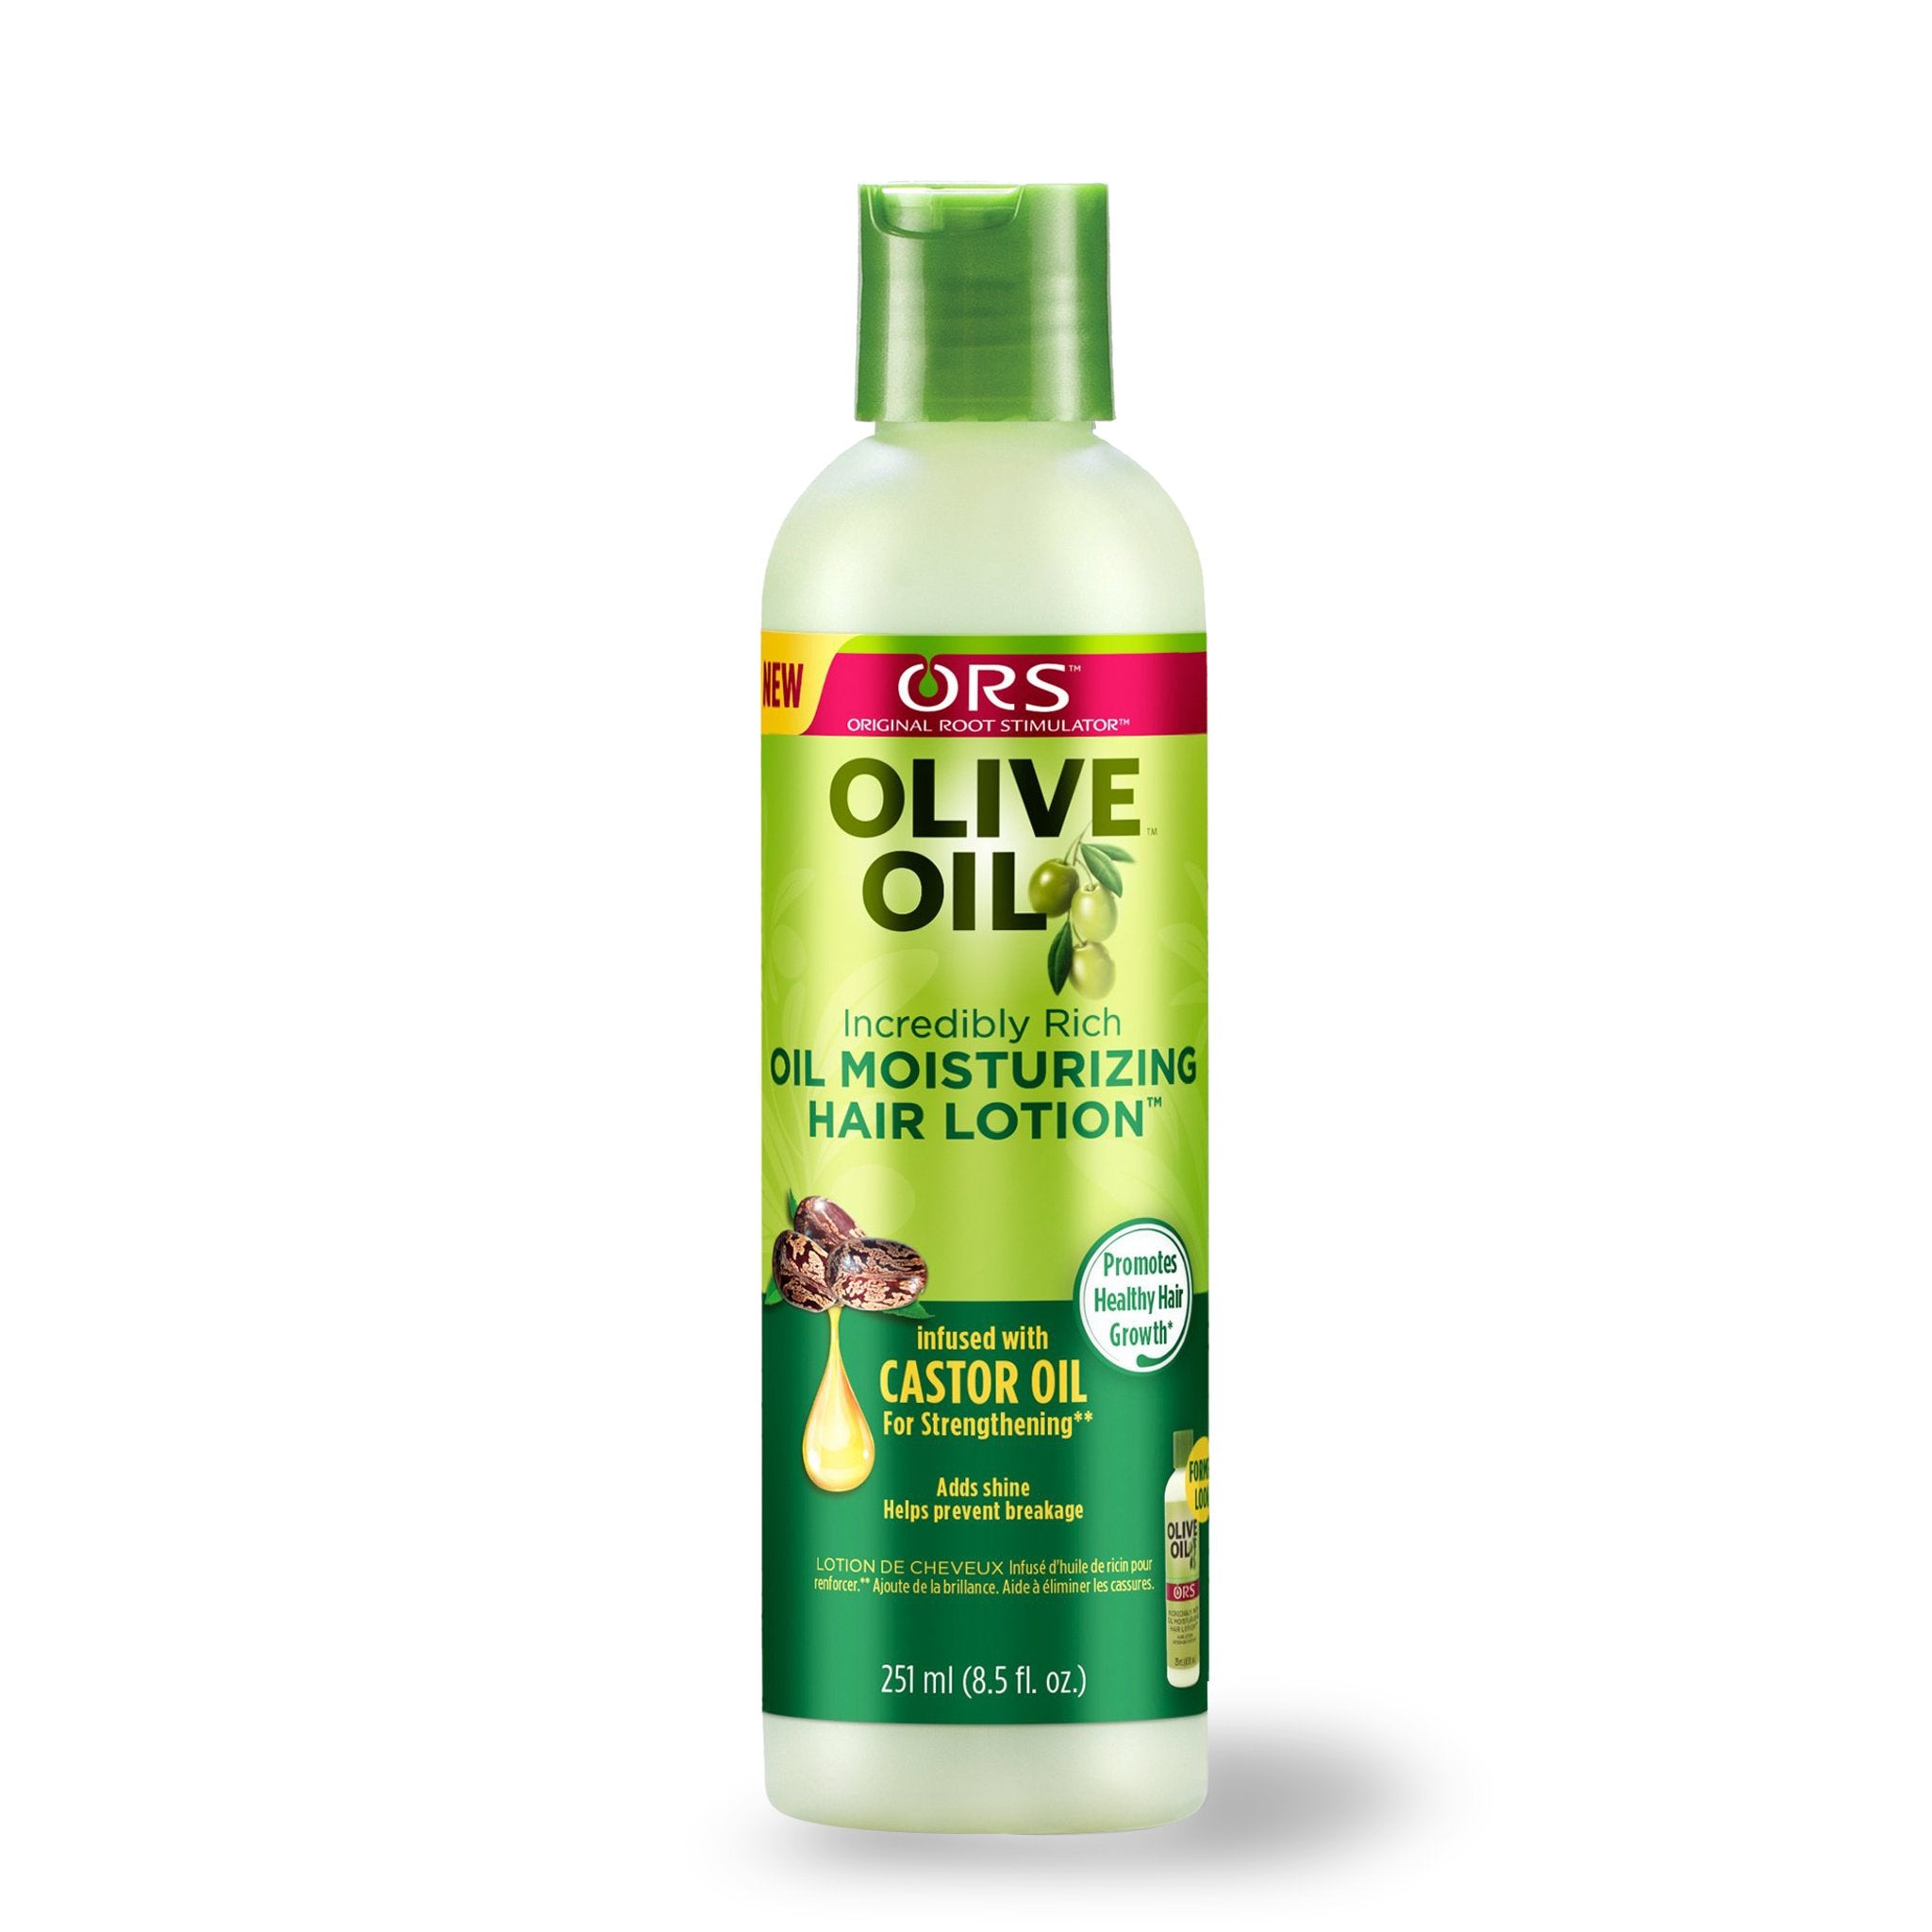 Incredibly Rich Oil Moisturizing Hair Lotion (8.5 oz) | Olive Oil – ORS Hair  Care ®